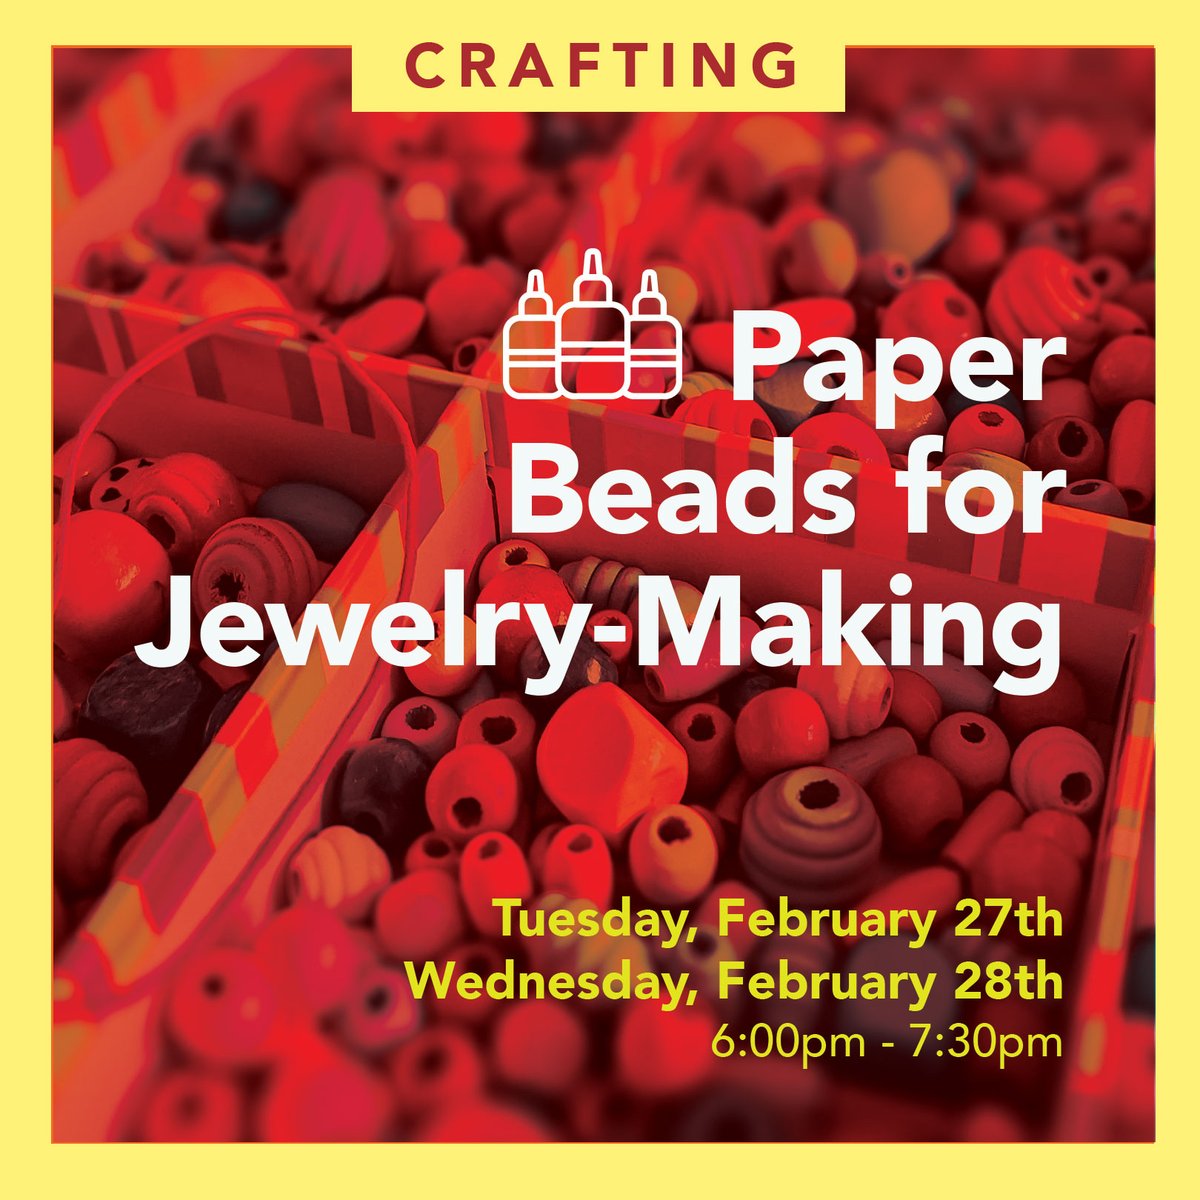 In this two-day class (February 27 and 28), you will learn how to make paper beads (Day 1) and then create jewelry from these hand-made beads (Day 2) with library staff member Cheri Morreale. 

Visit our website to register.

#paperbeads #jewelrymaking #crafts #homemadejewelry